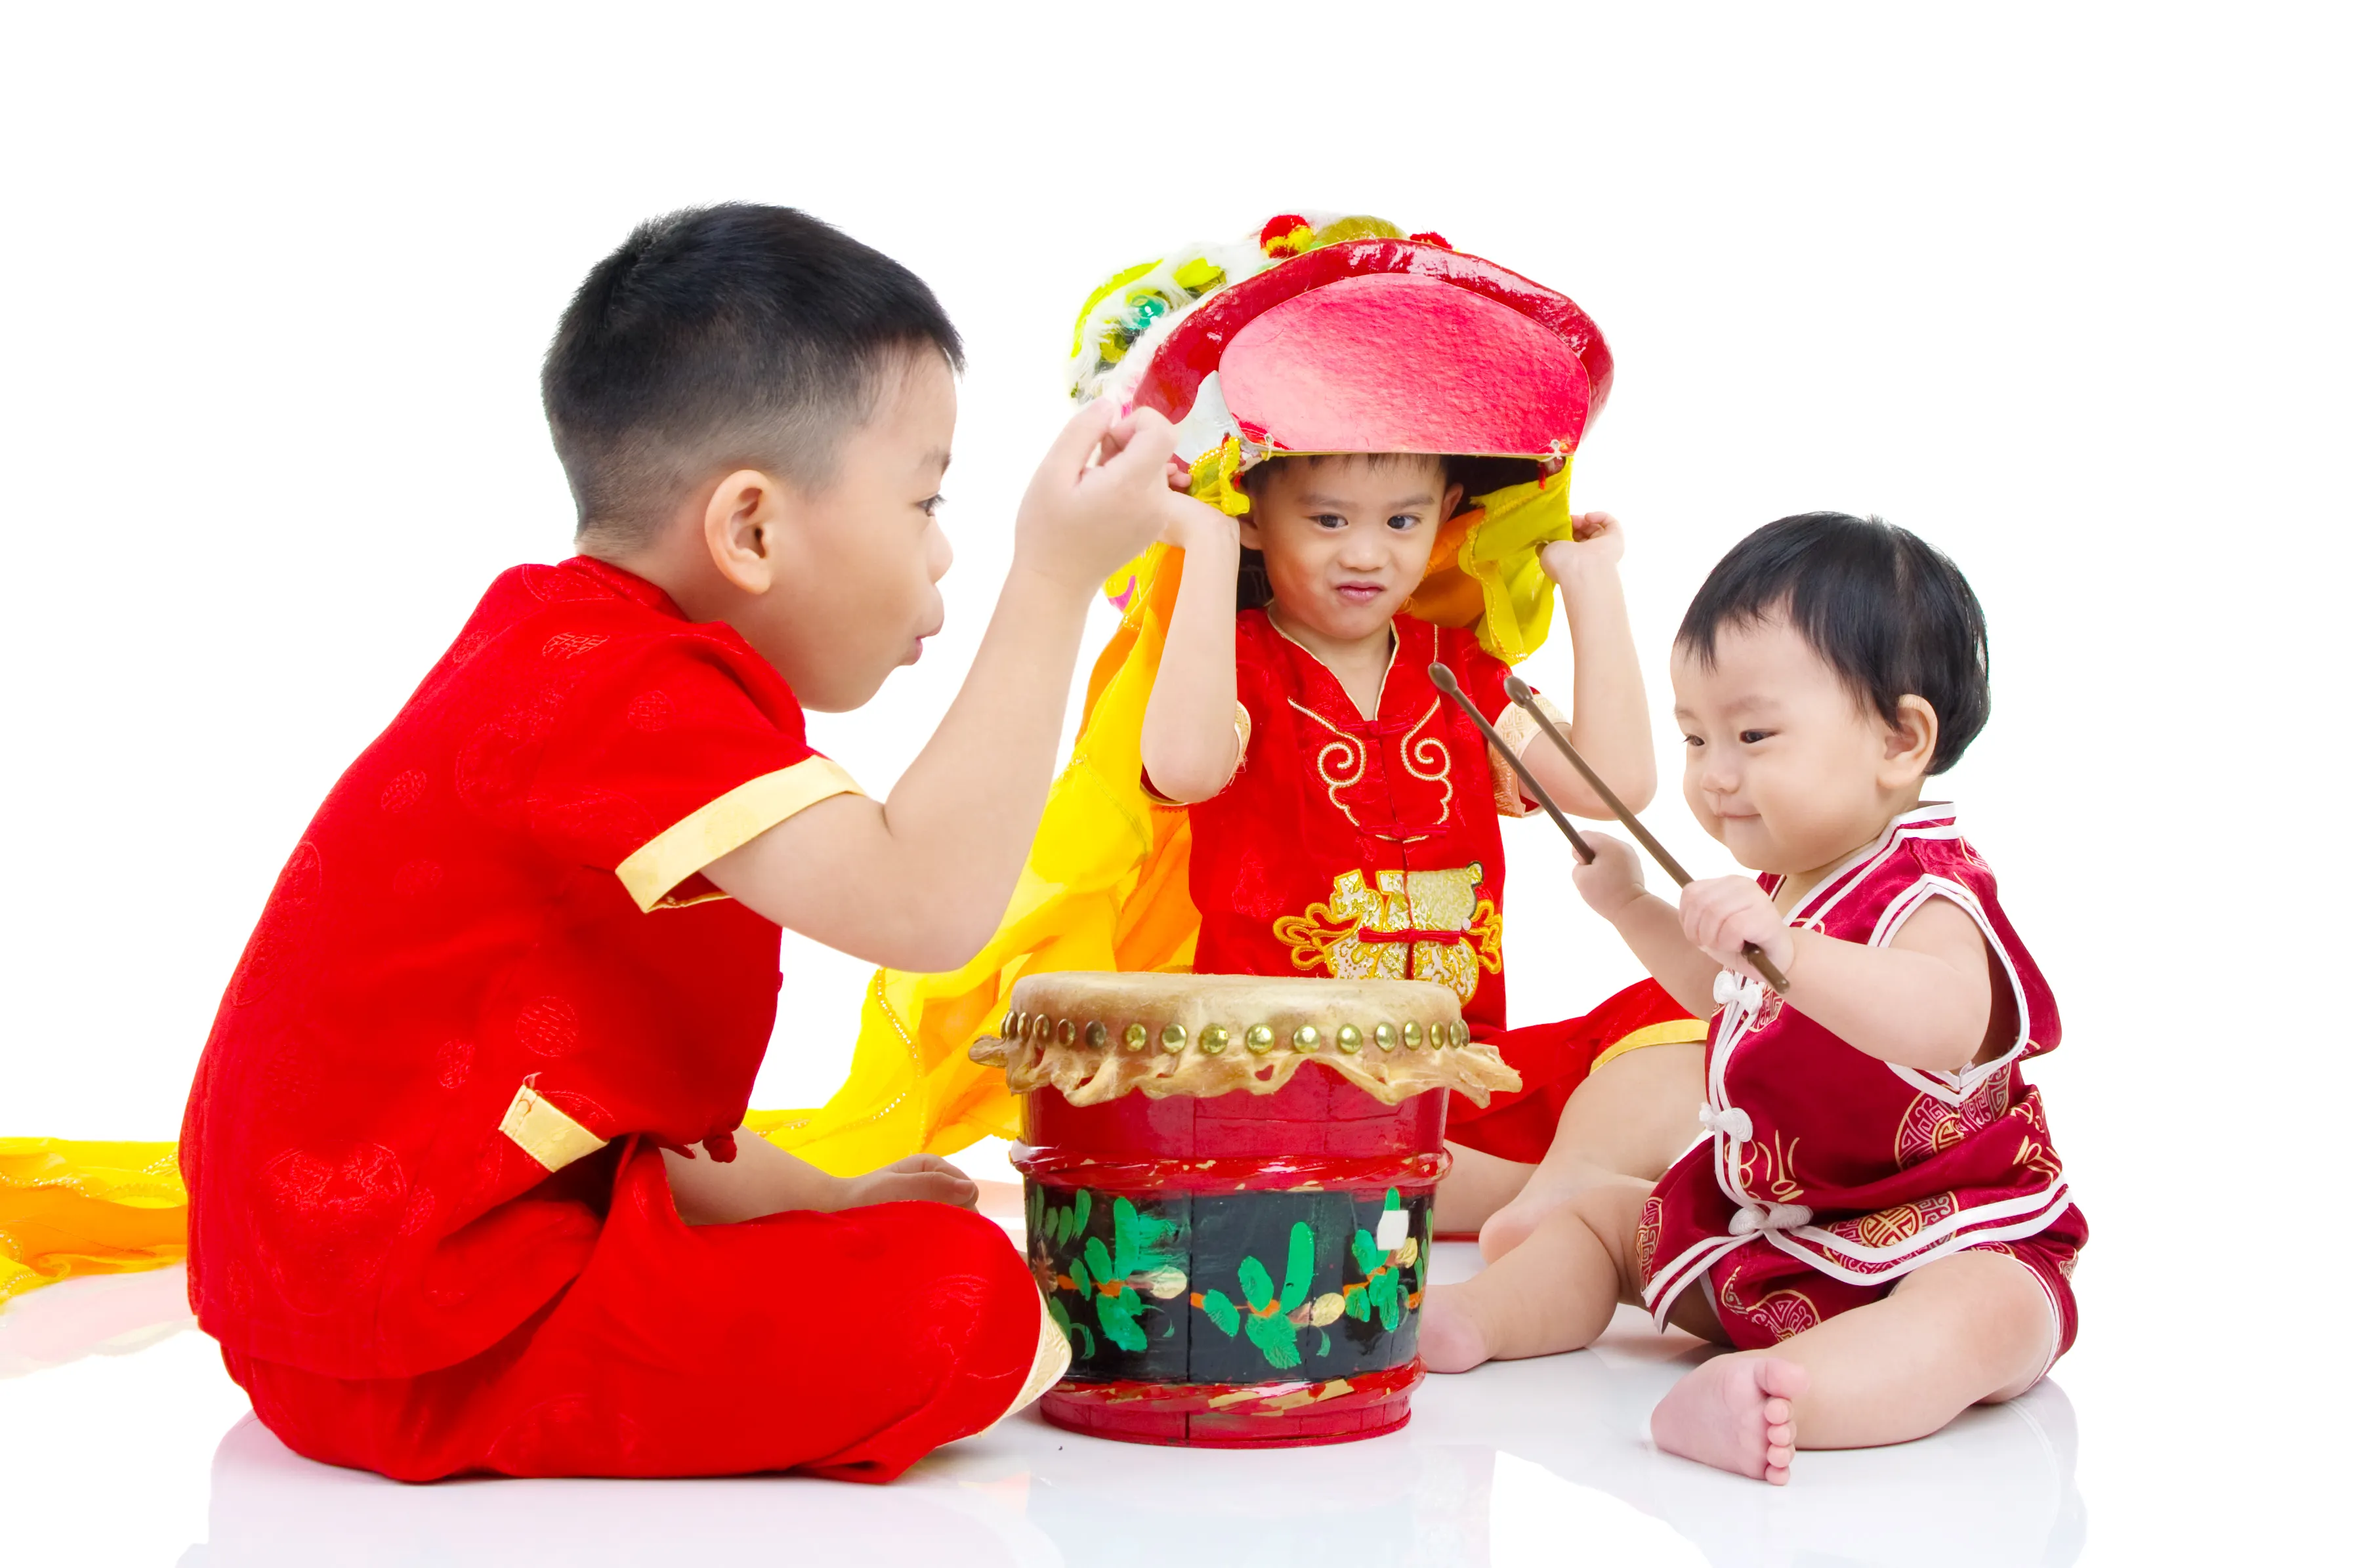 Chinese New Year traditions crafts, games, history, and practice can be enjoyable with kids